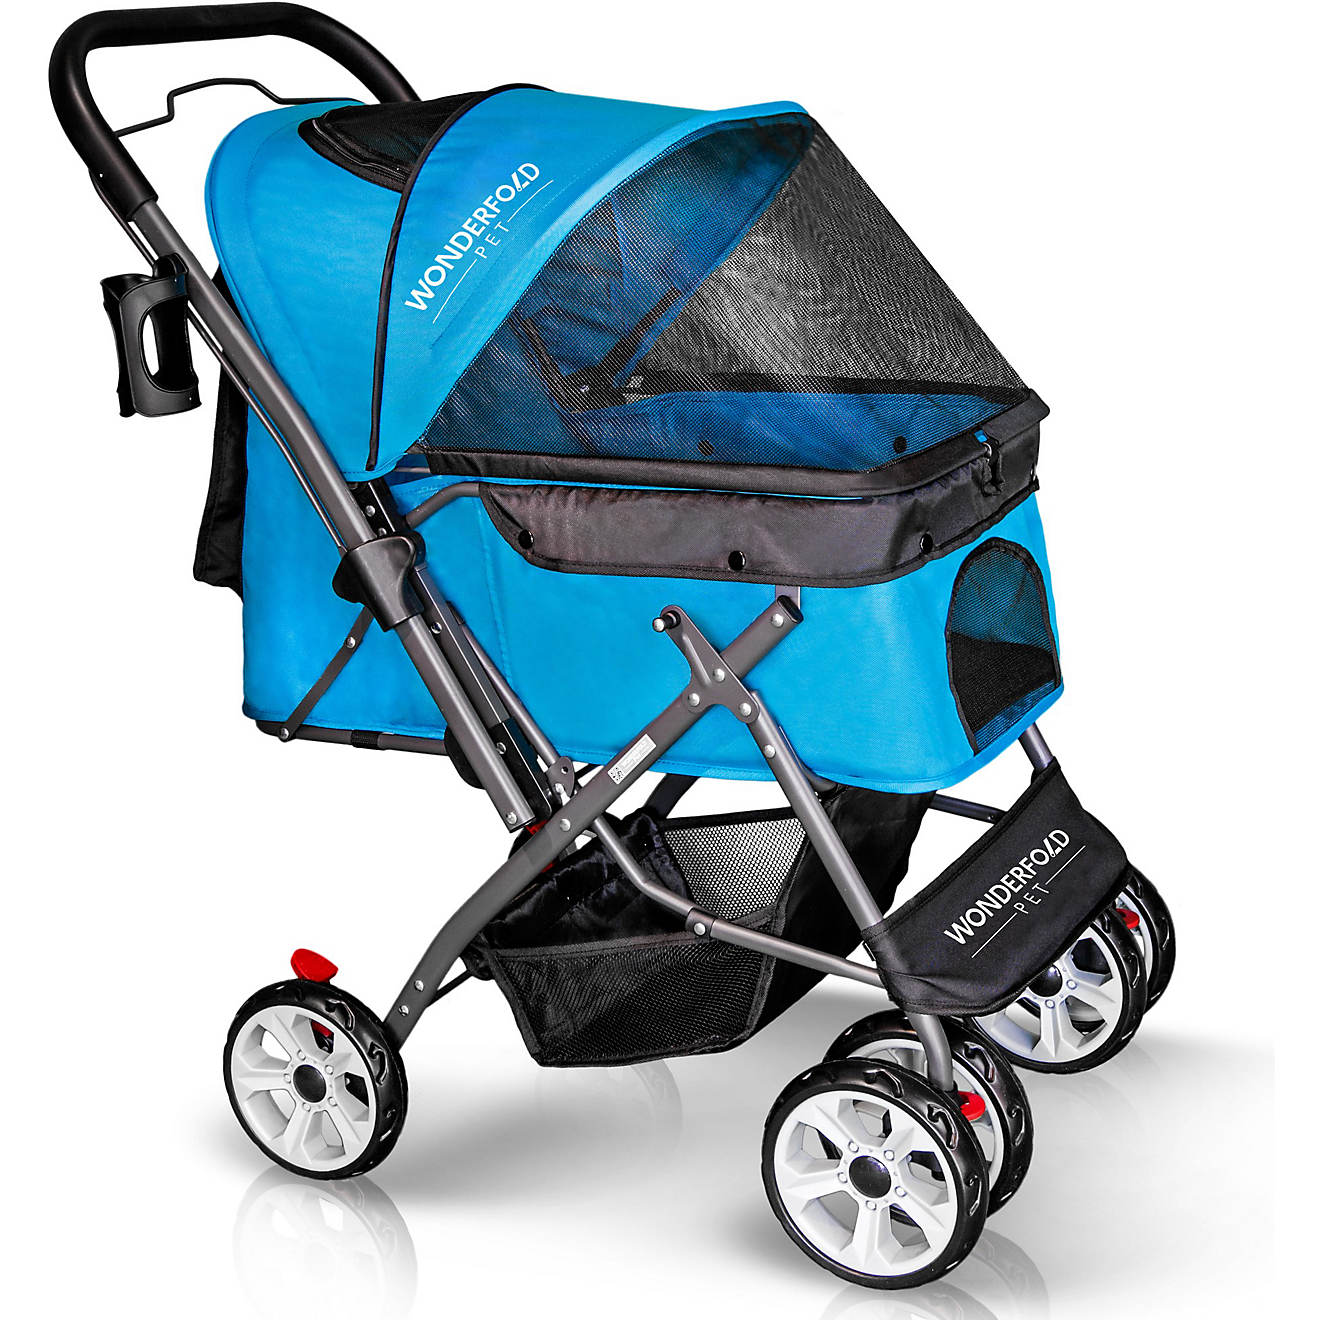 Wonderfold Wagon Folding Pet Stroller with Zipperless Entry and Reversible Handle                                                - view number 1